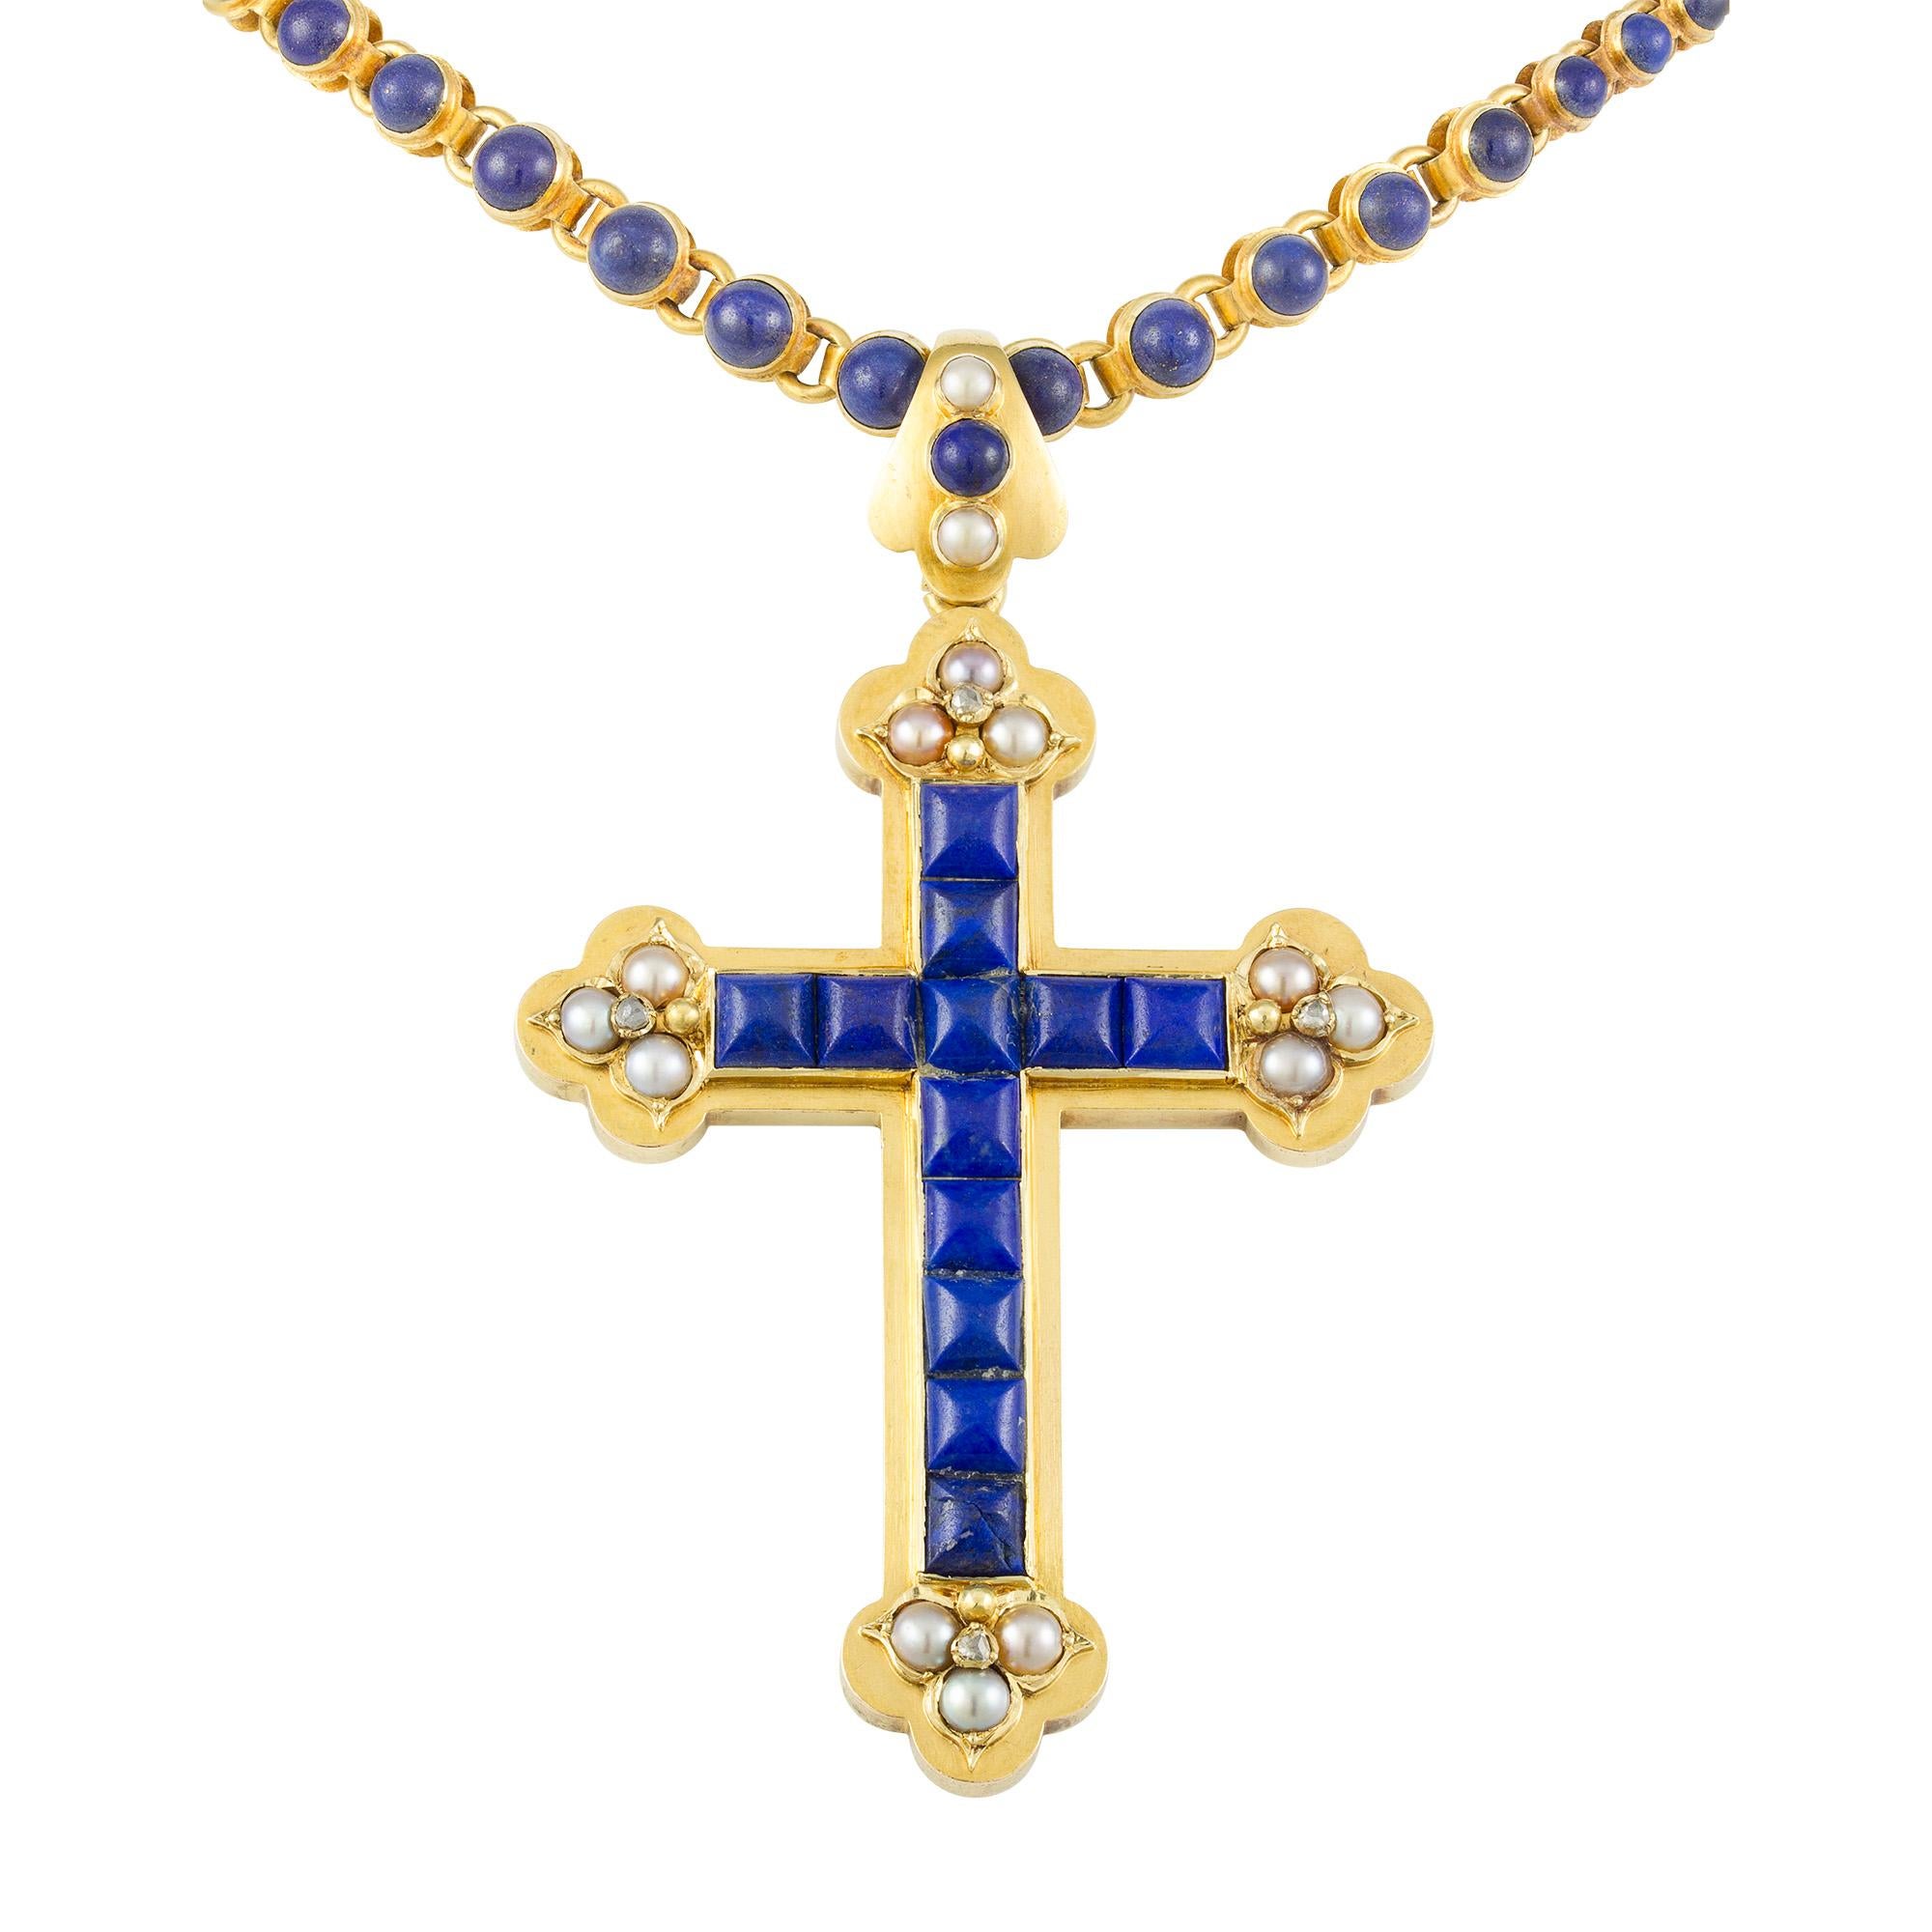 A Victorian lapis, half pearl and diamond pendant, in the form of a stylised Latin cross, set with twelve square cabochon-cut lapis and embellished with four fleur-de-lis clusters of half pearls and old-cut diamonds, to closed satin-finish yellow